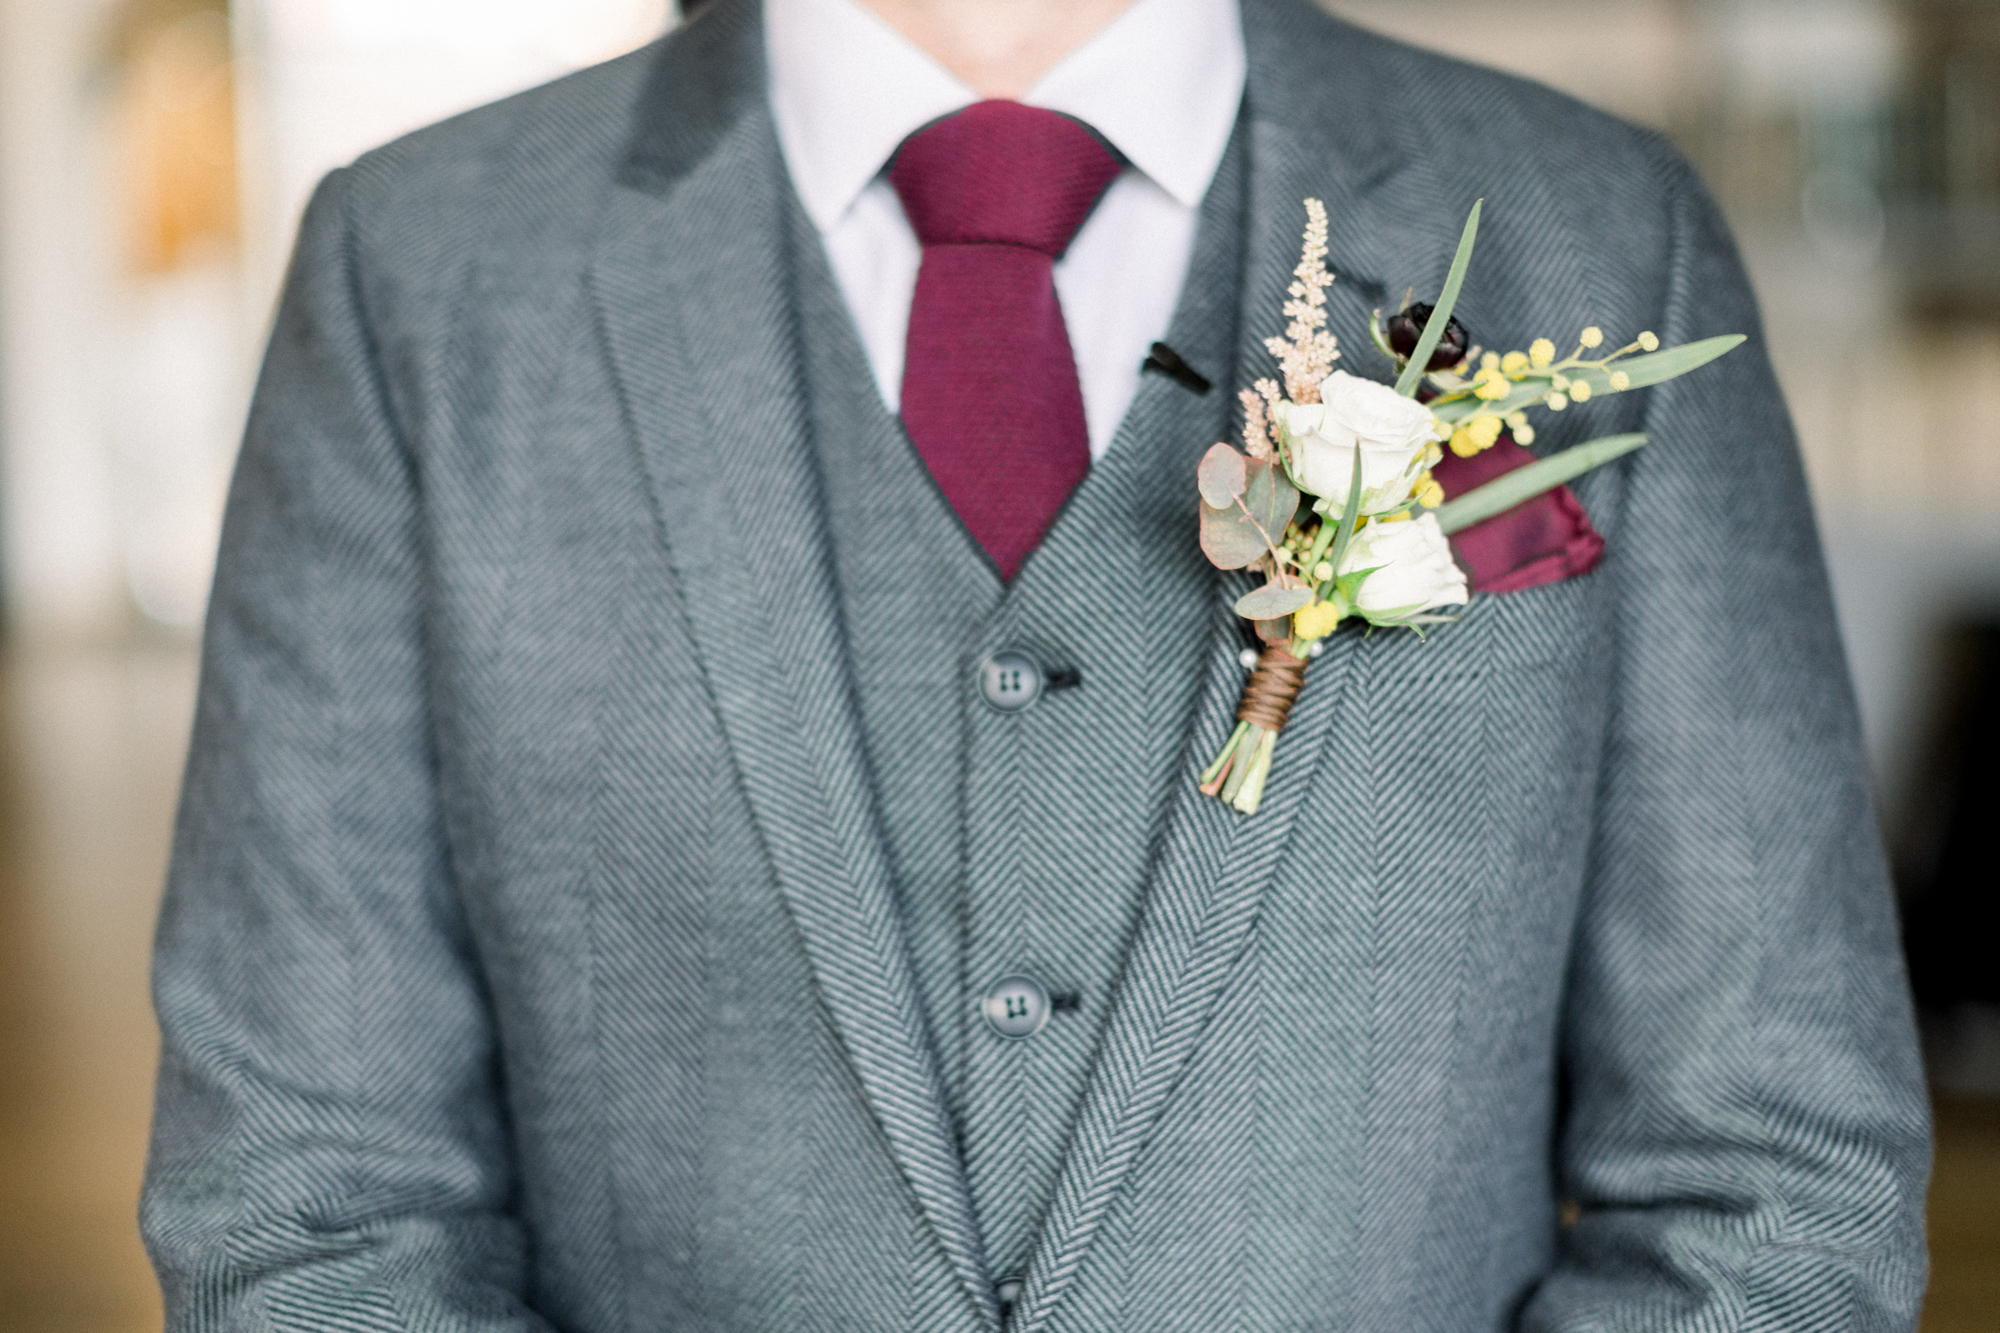 Winter wedding suit with boutonniere at LIC hotel